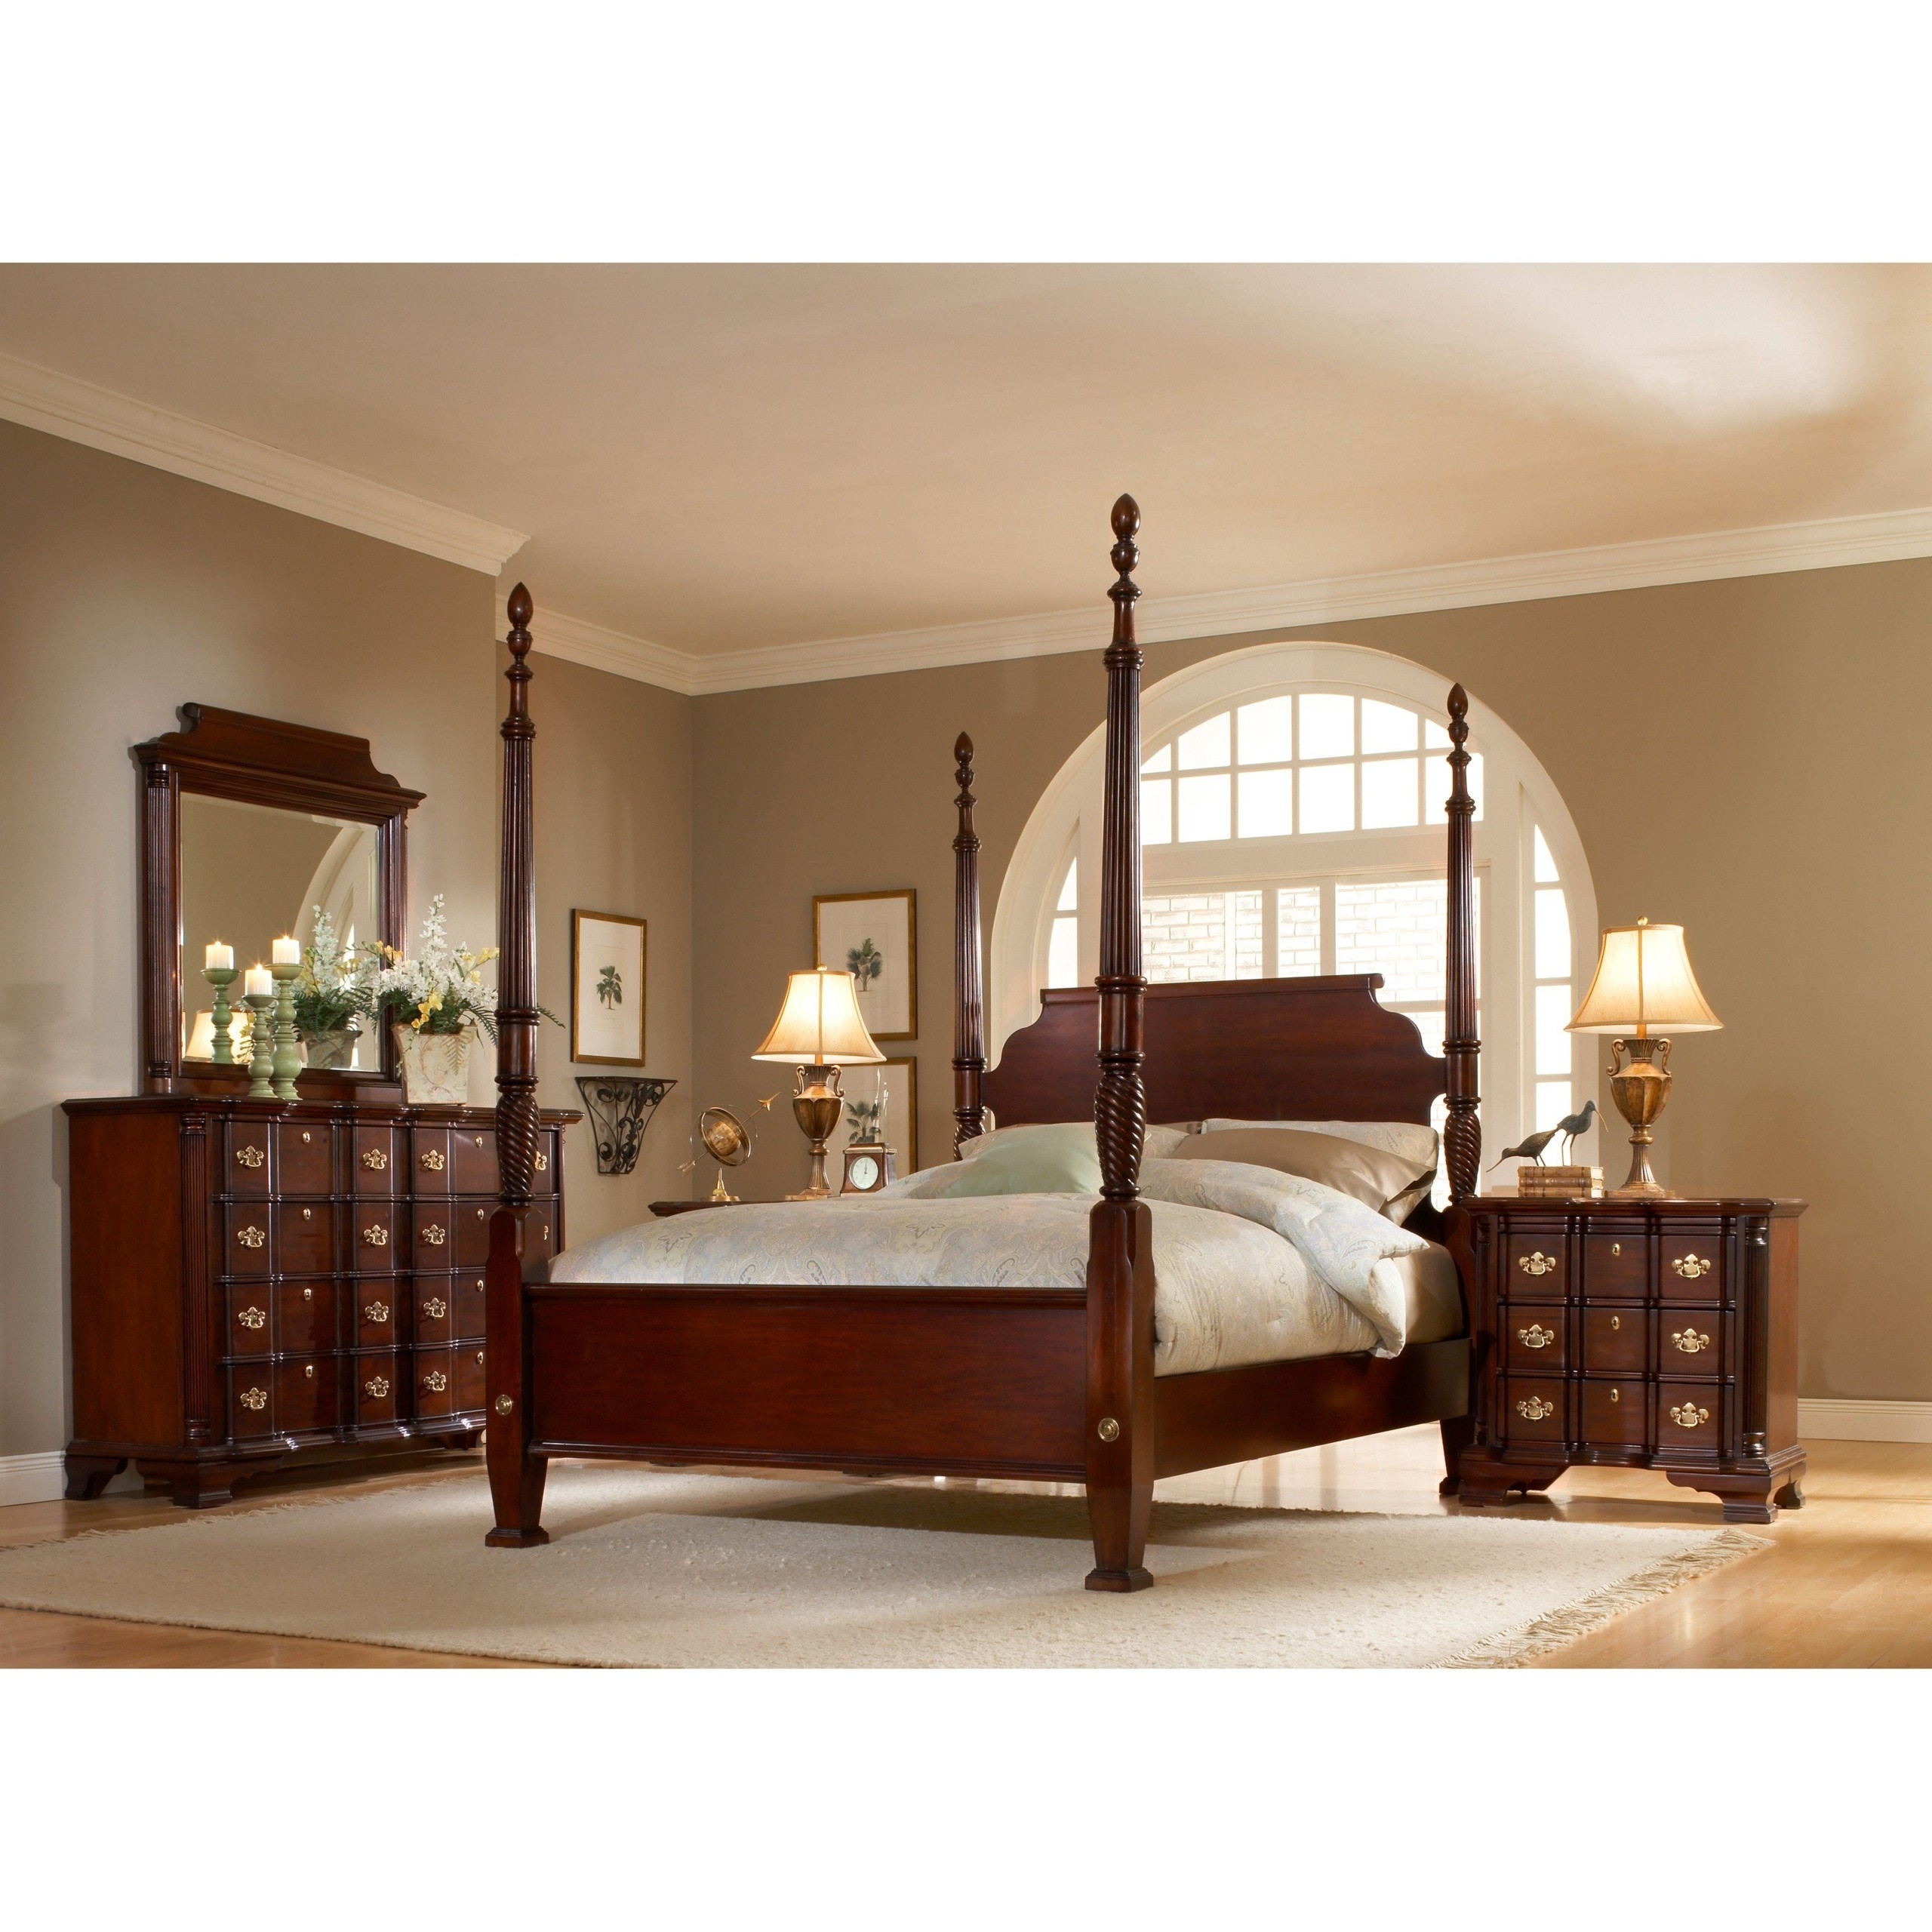 King Size Four Poster Beds - Ideas on Foter